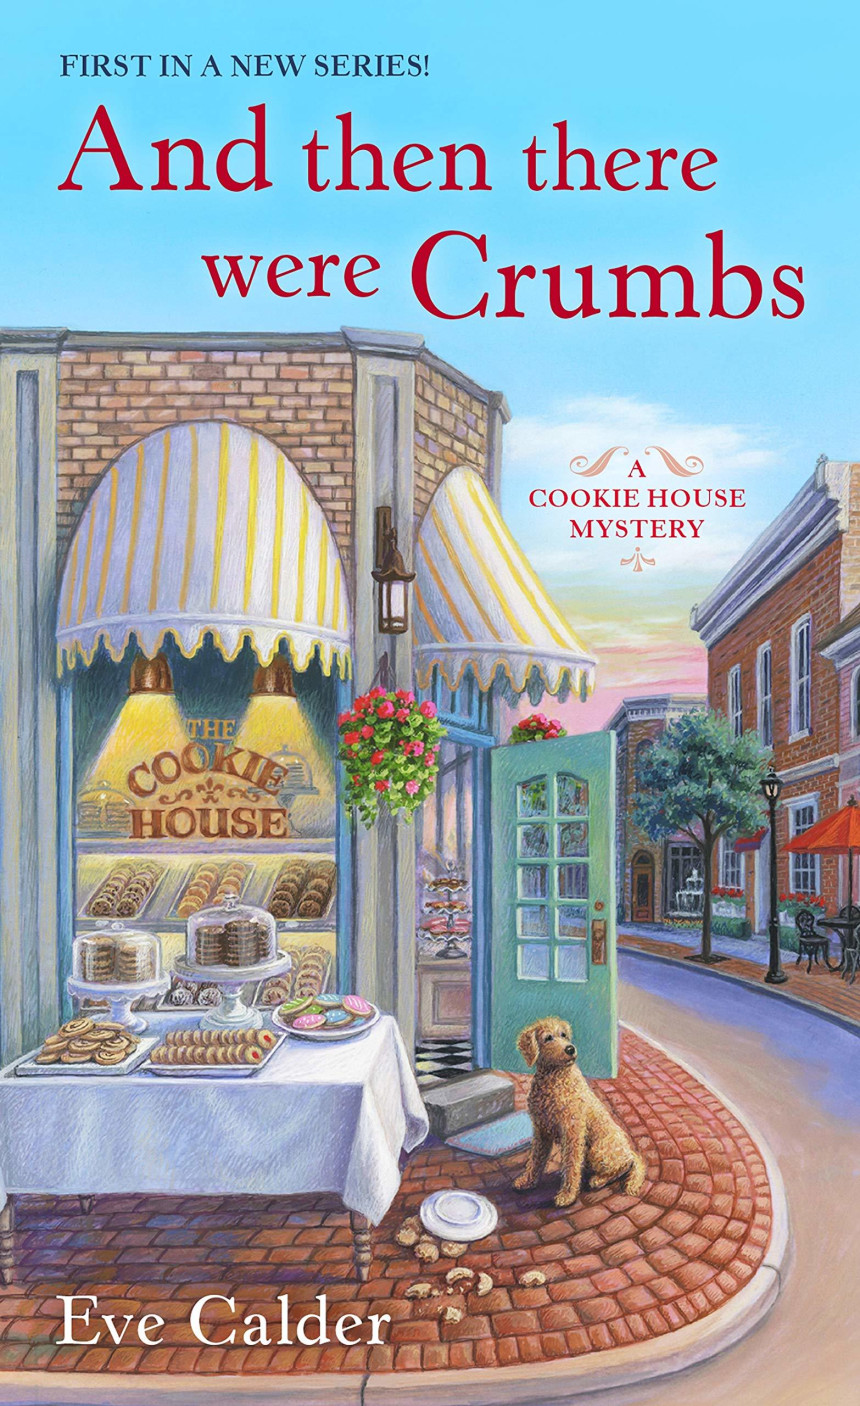 Free Download A Cookie House Mystery #1 And Then There Were Crumbs by Eve Calder